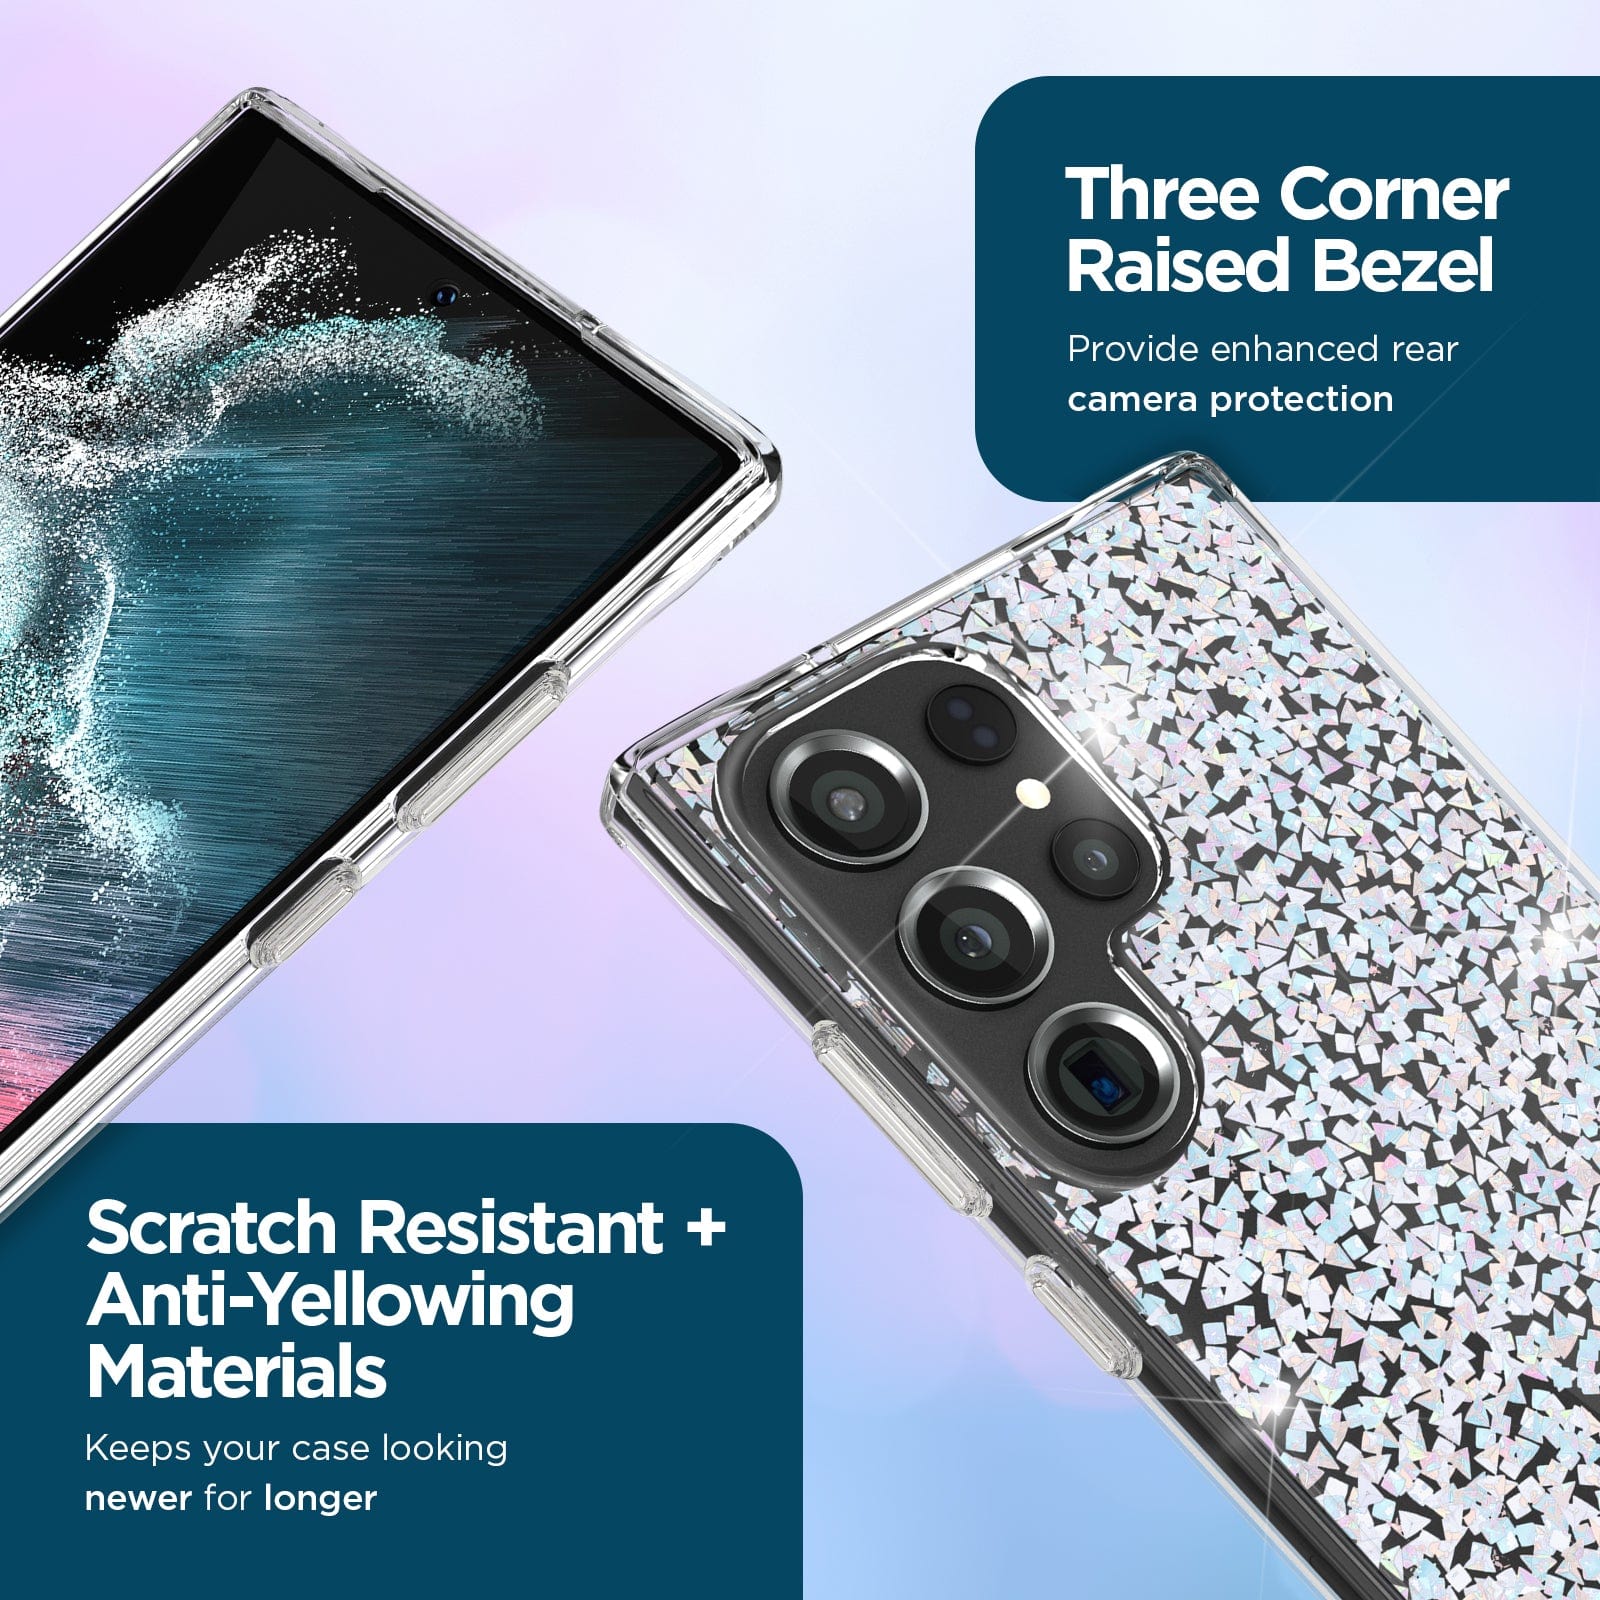 THREE CORNER RAISED BEZEL. PROVIDE ENHANCED REAR CAMERA PROTECTION. SCRATCH RESISTANT + ANTI-YELLOWING MATERIALS. KEEPS YOUR CASE LOOKING NEWER FOR LONGER.